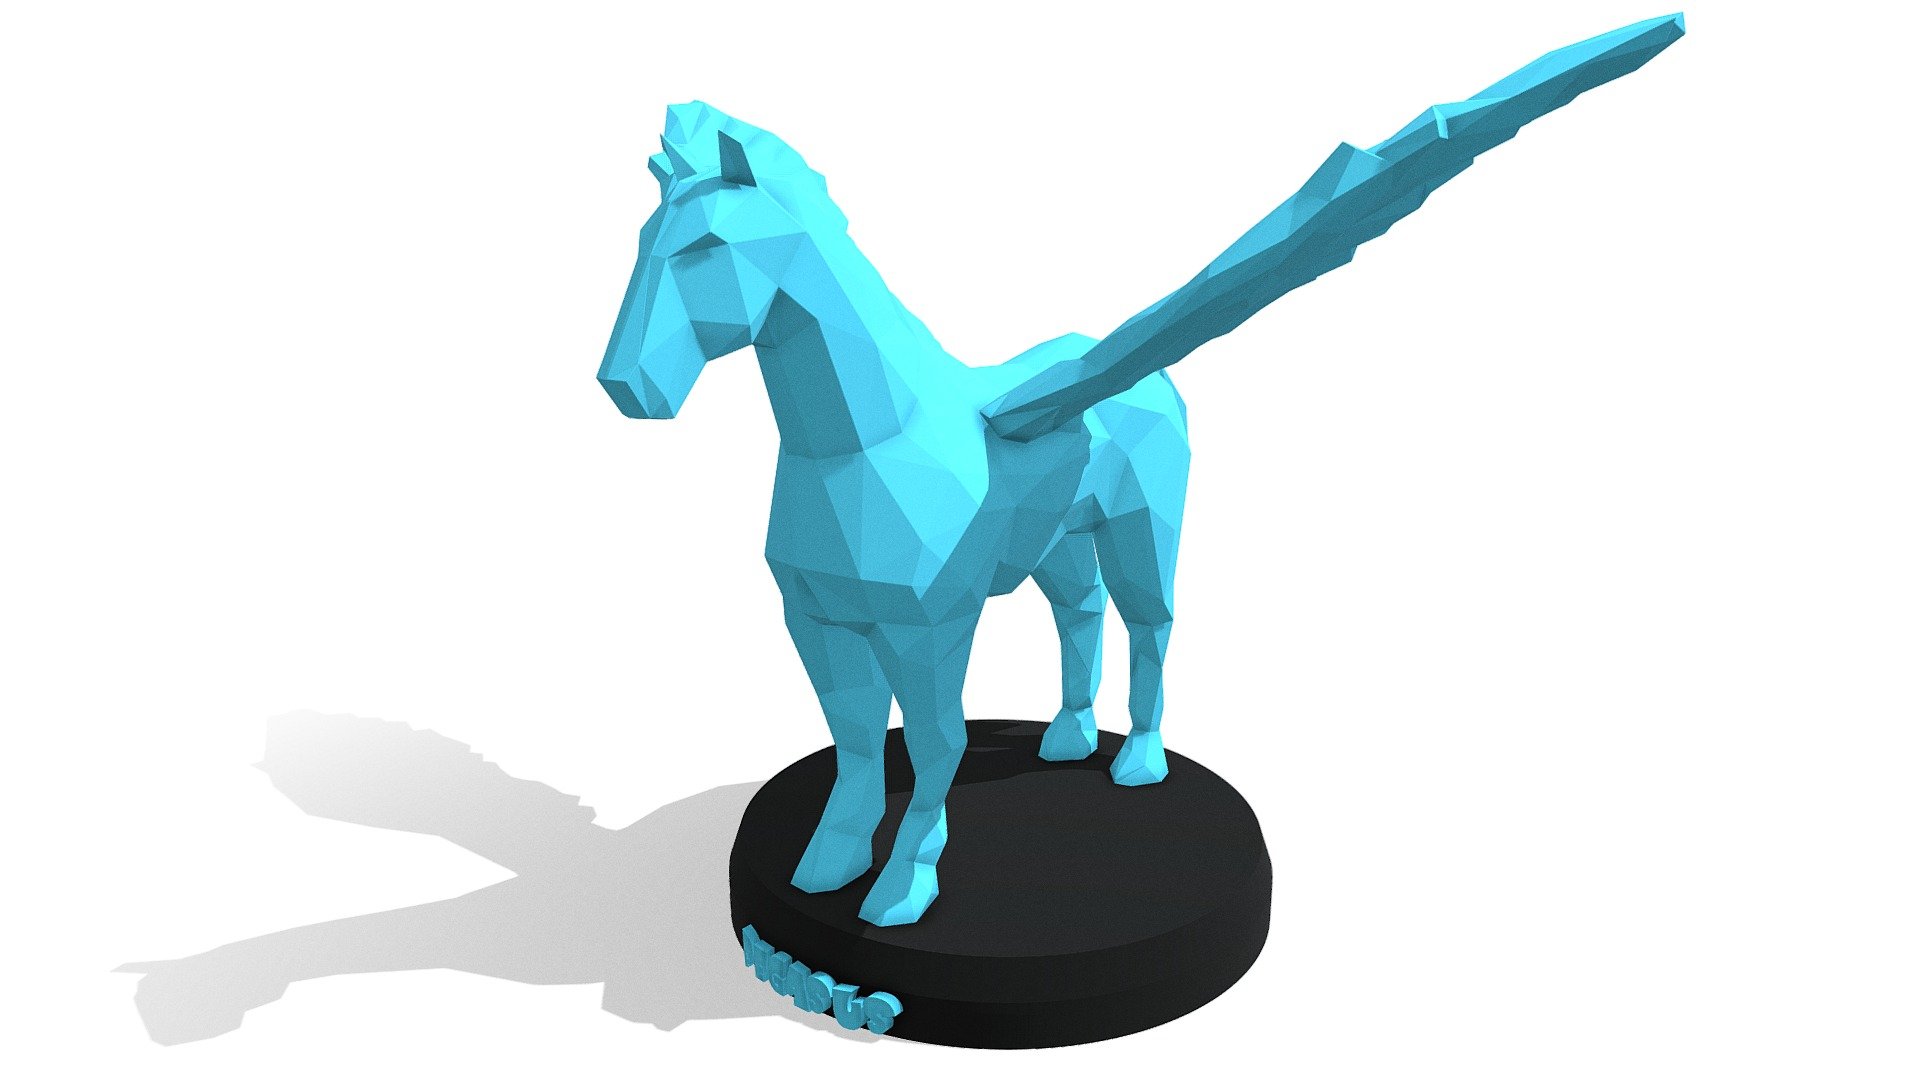 Polygonal 3D Model with Parametric modeling with gold material, make it recommend for :




Basic modeling 

Rigging 

sculpting 

Become Statue

Decorate

3D Print File

Toy

Have fun  :) - Poly Pegasus - Buy Royalty Free 3D model by Puppy3D 3d model